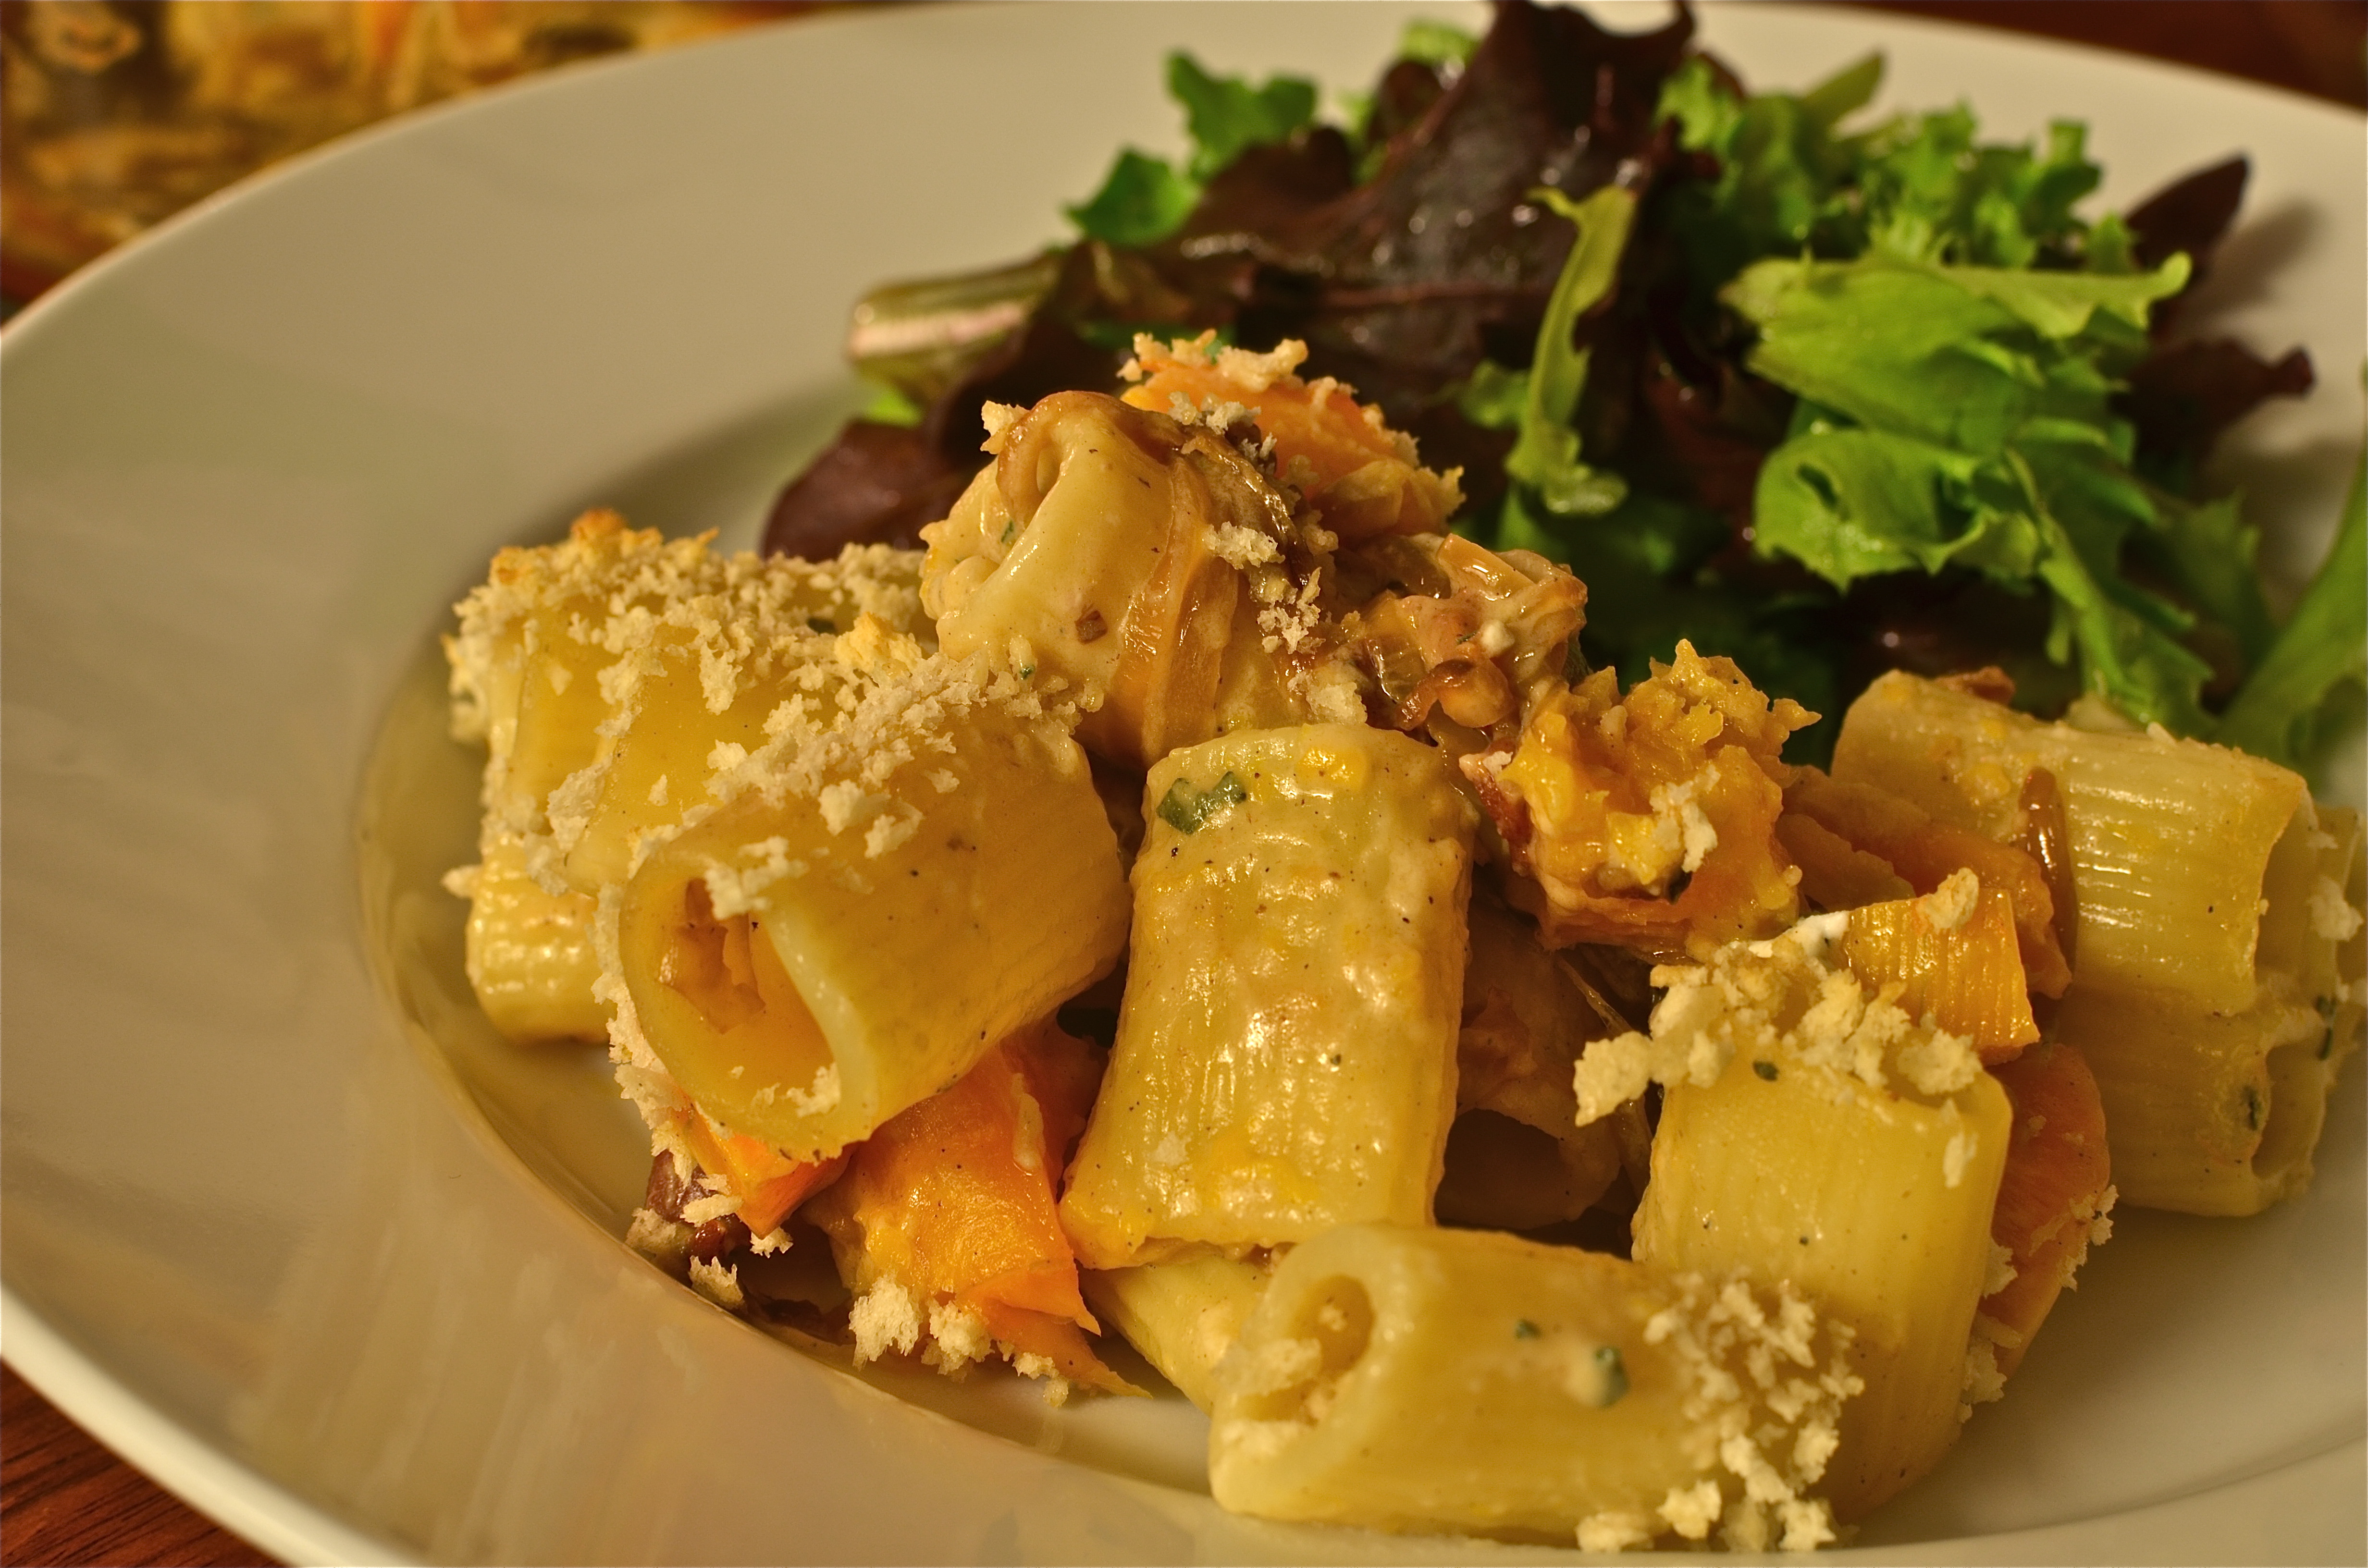 Creamy Baked Rigatoni with Butternut Squash + Goat Cheese